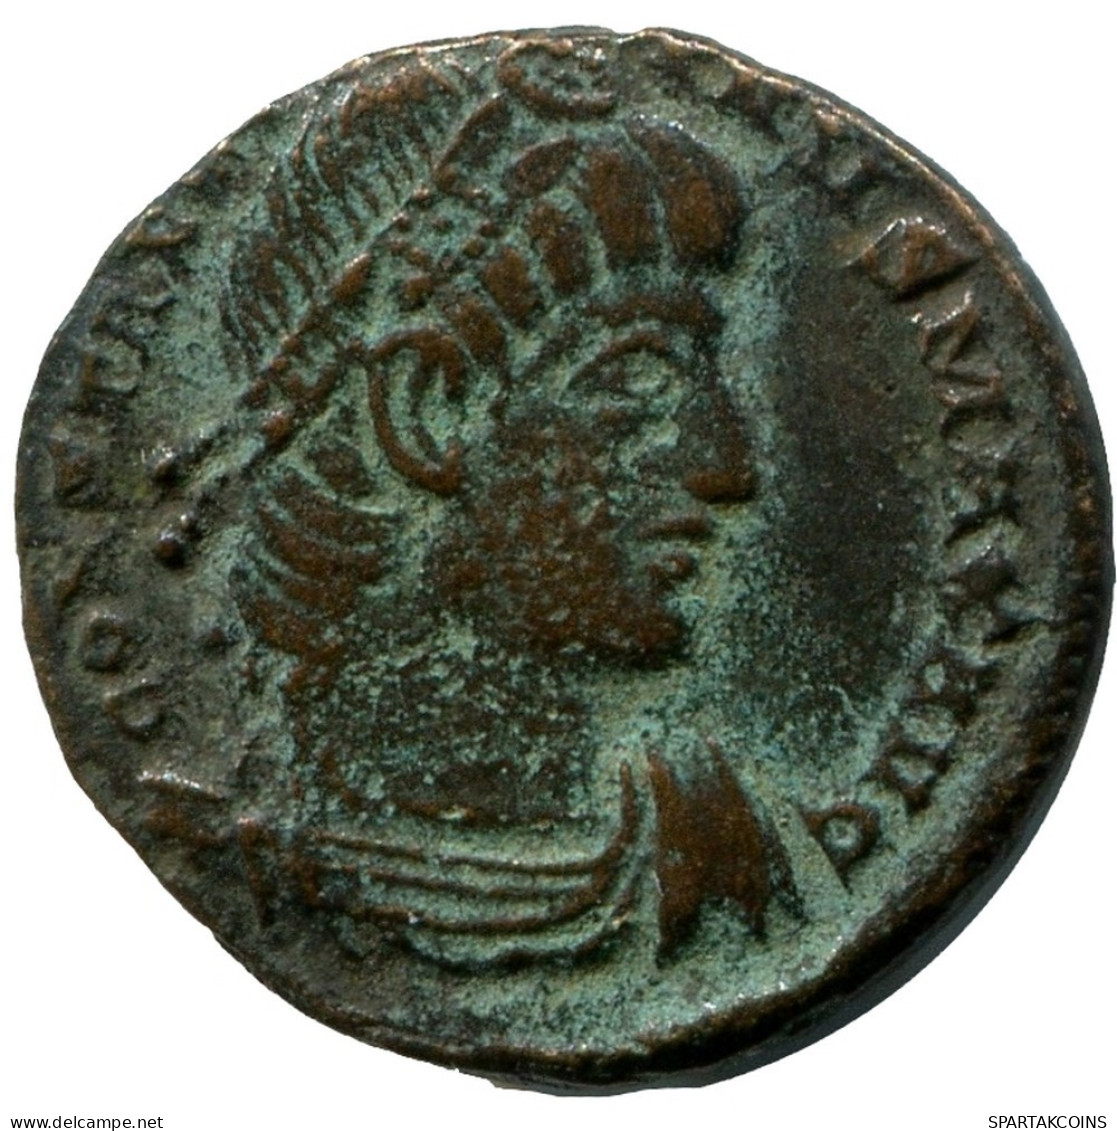 CONSTANTINE I MINTED IN CONSTANTINOPLE FOUND IN IHNASYAH HOARD #ANC10730.14.D.A - El Imperio Christiano (307 / 363)